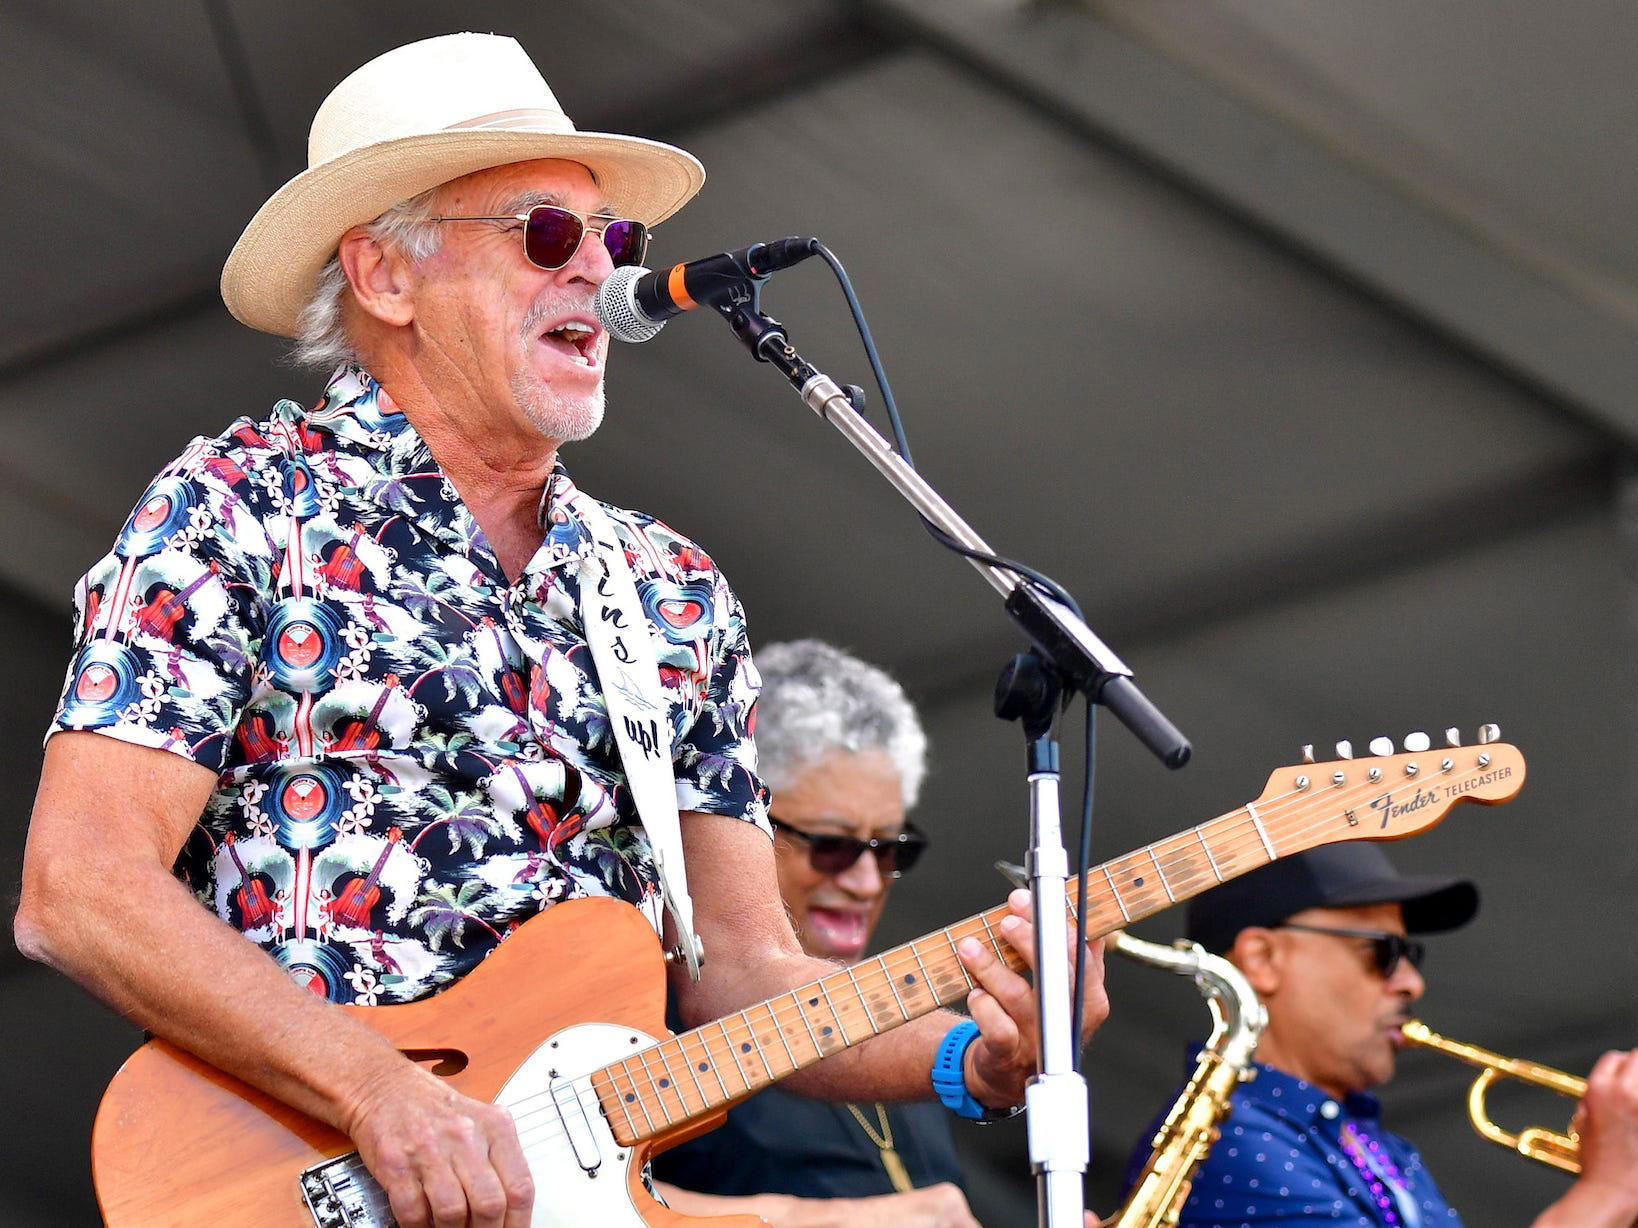 Jimmy Buffet became a billionaire after 5 decades in the music industry ...